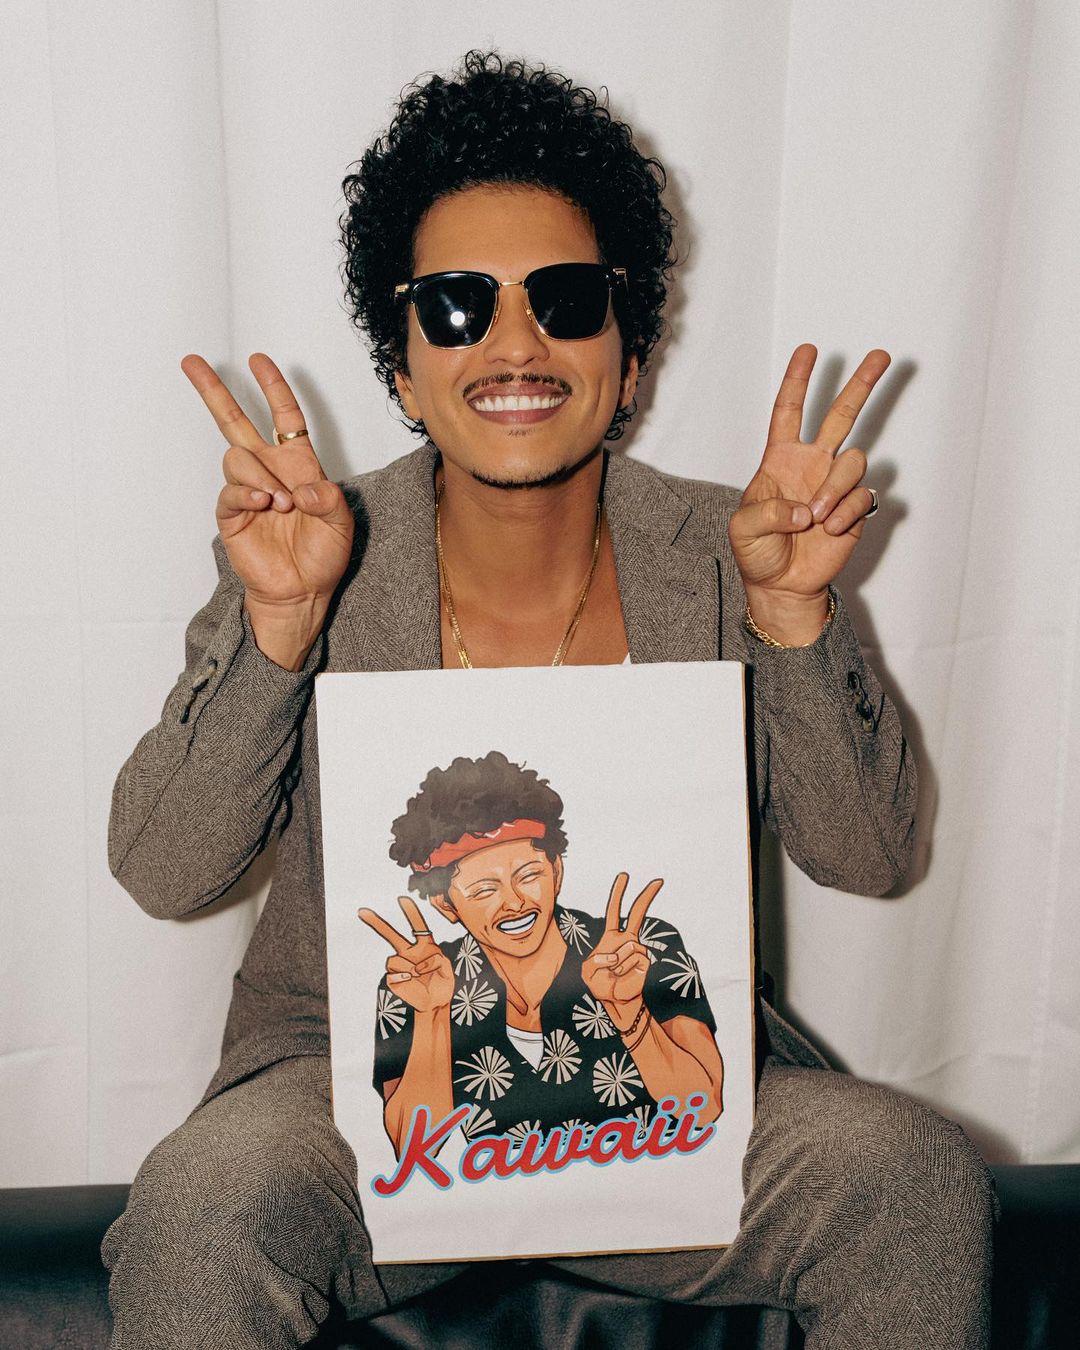 One of the top publications of @brunomars which has 1.1M likes and 5.9K comments